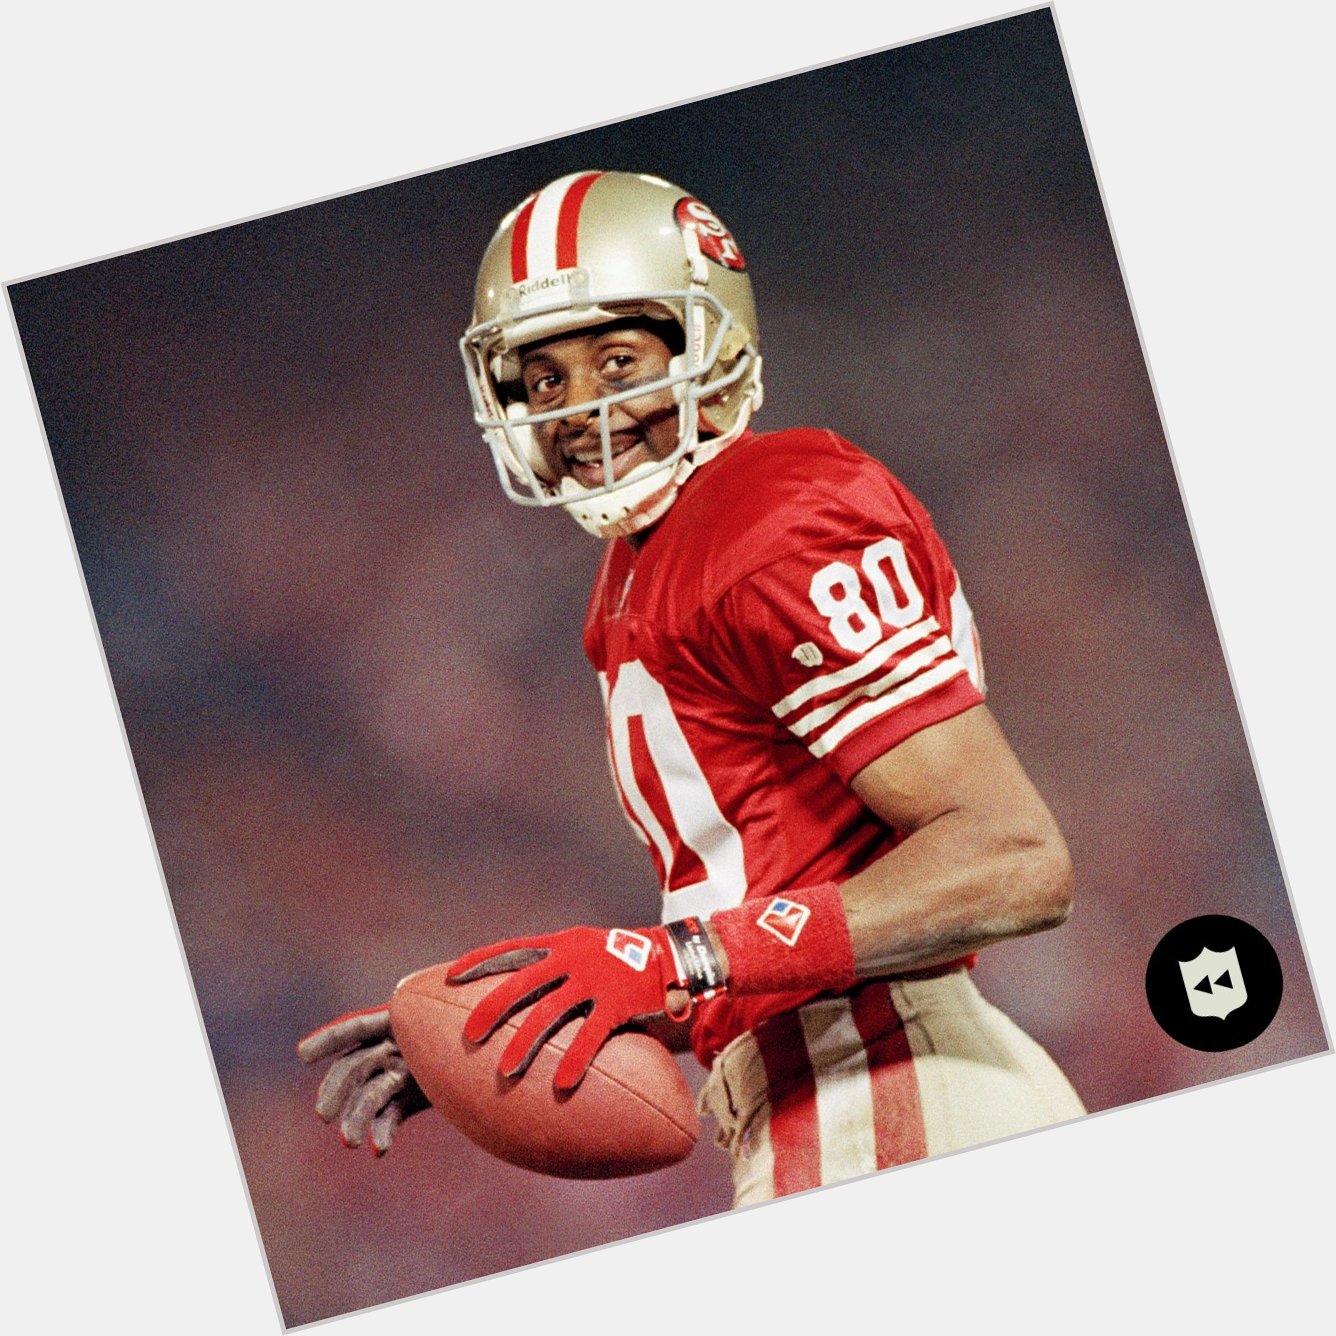 Everyone wish one of the Greatest Receivers of all time 
Jerry Rice !!!
a Happy Birthday  !!!! 